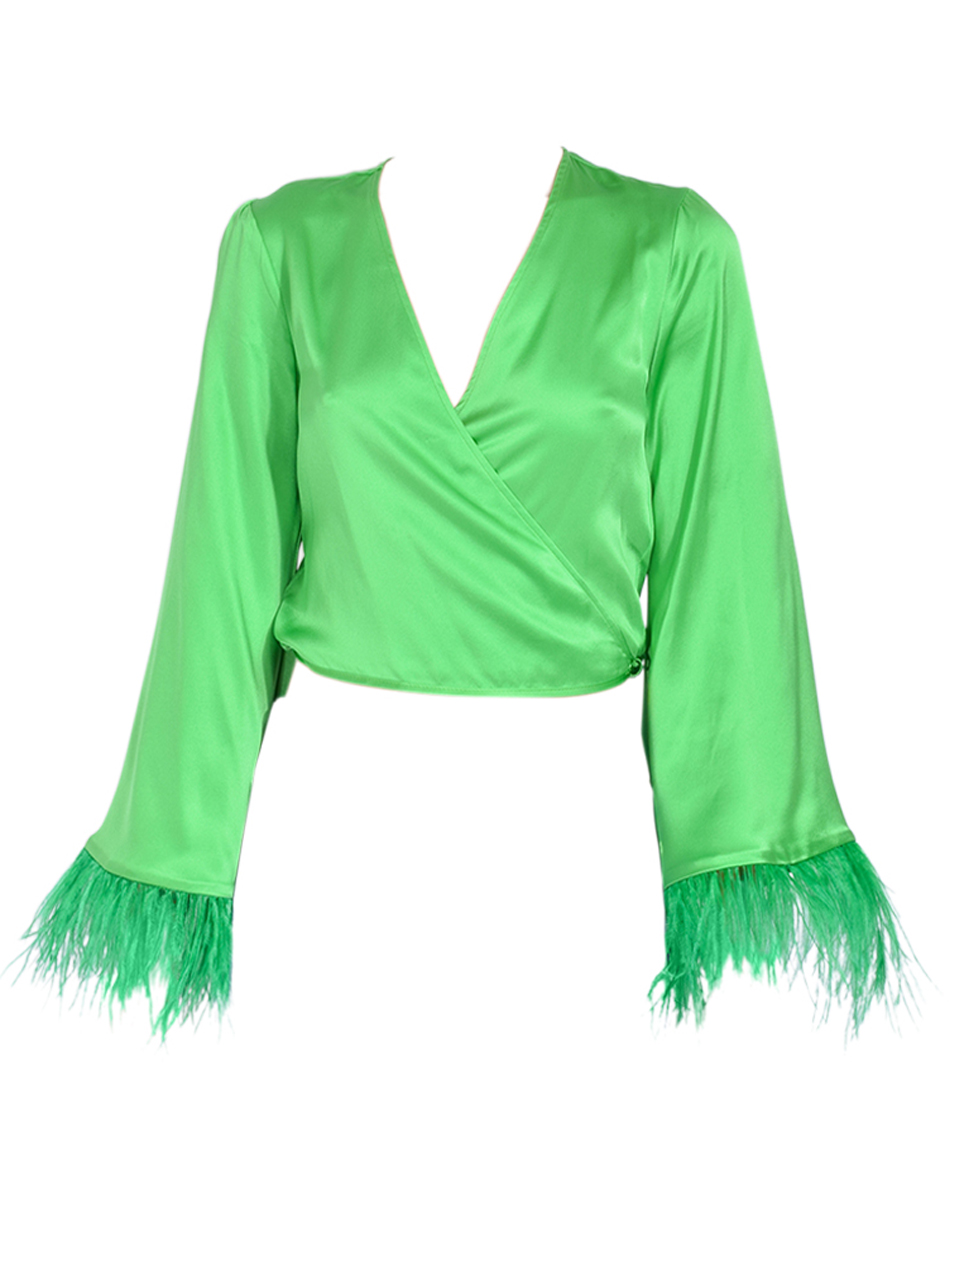 DELFI Aya Top with Feather Sleeves in Green

